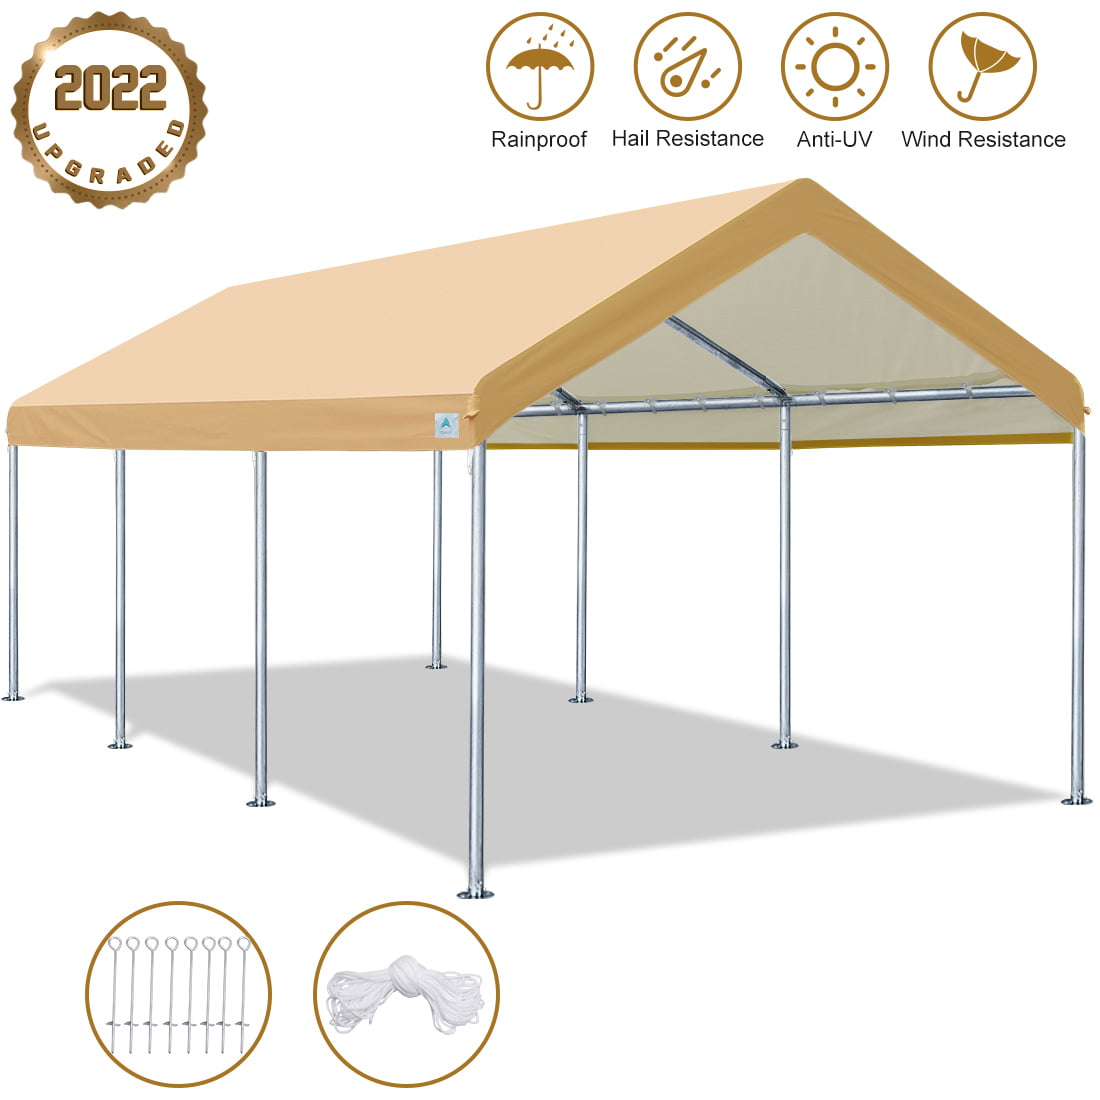 10x20 Heavy Duty Party Tent Carport Outdoors Metal Garage Shelter Weeding Tent 